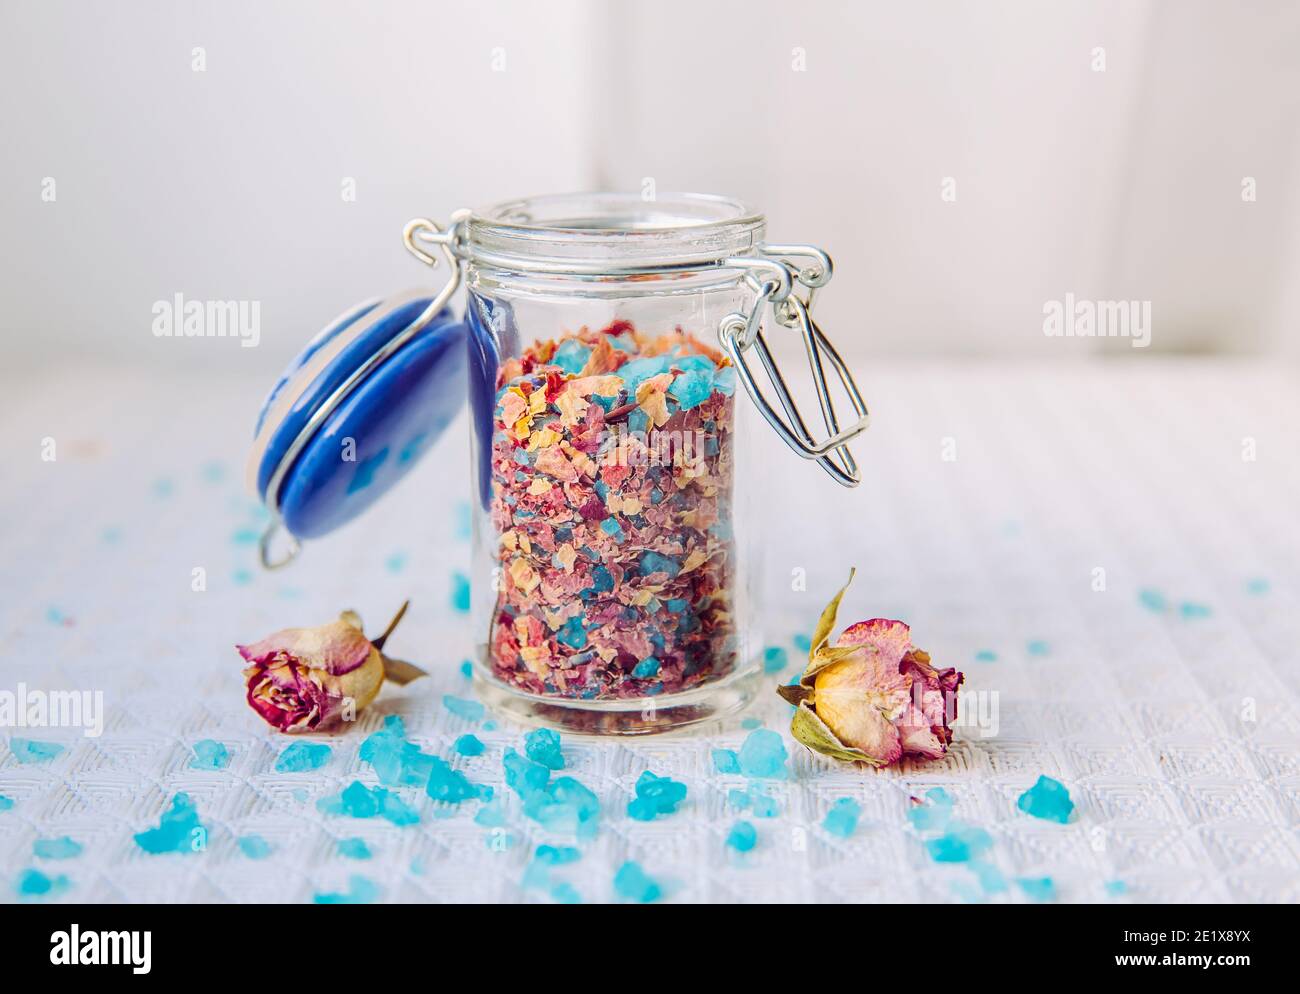 Homemade dry rose petals flower bath salt blend for aromatherapy and relaxation in bathtub, bath mix. Inside small cute jar. Bath salt mixed with herb Stock Photo